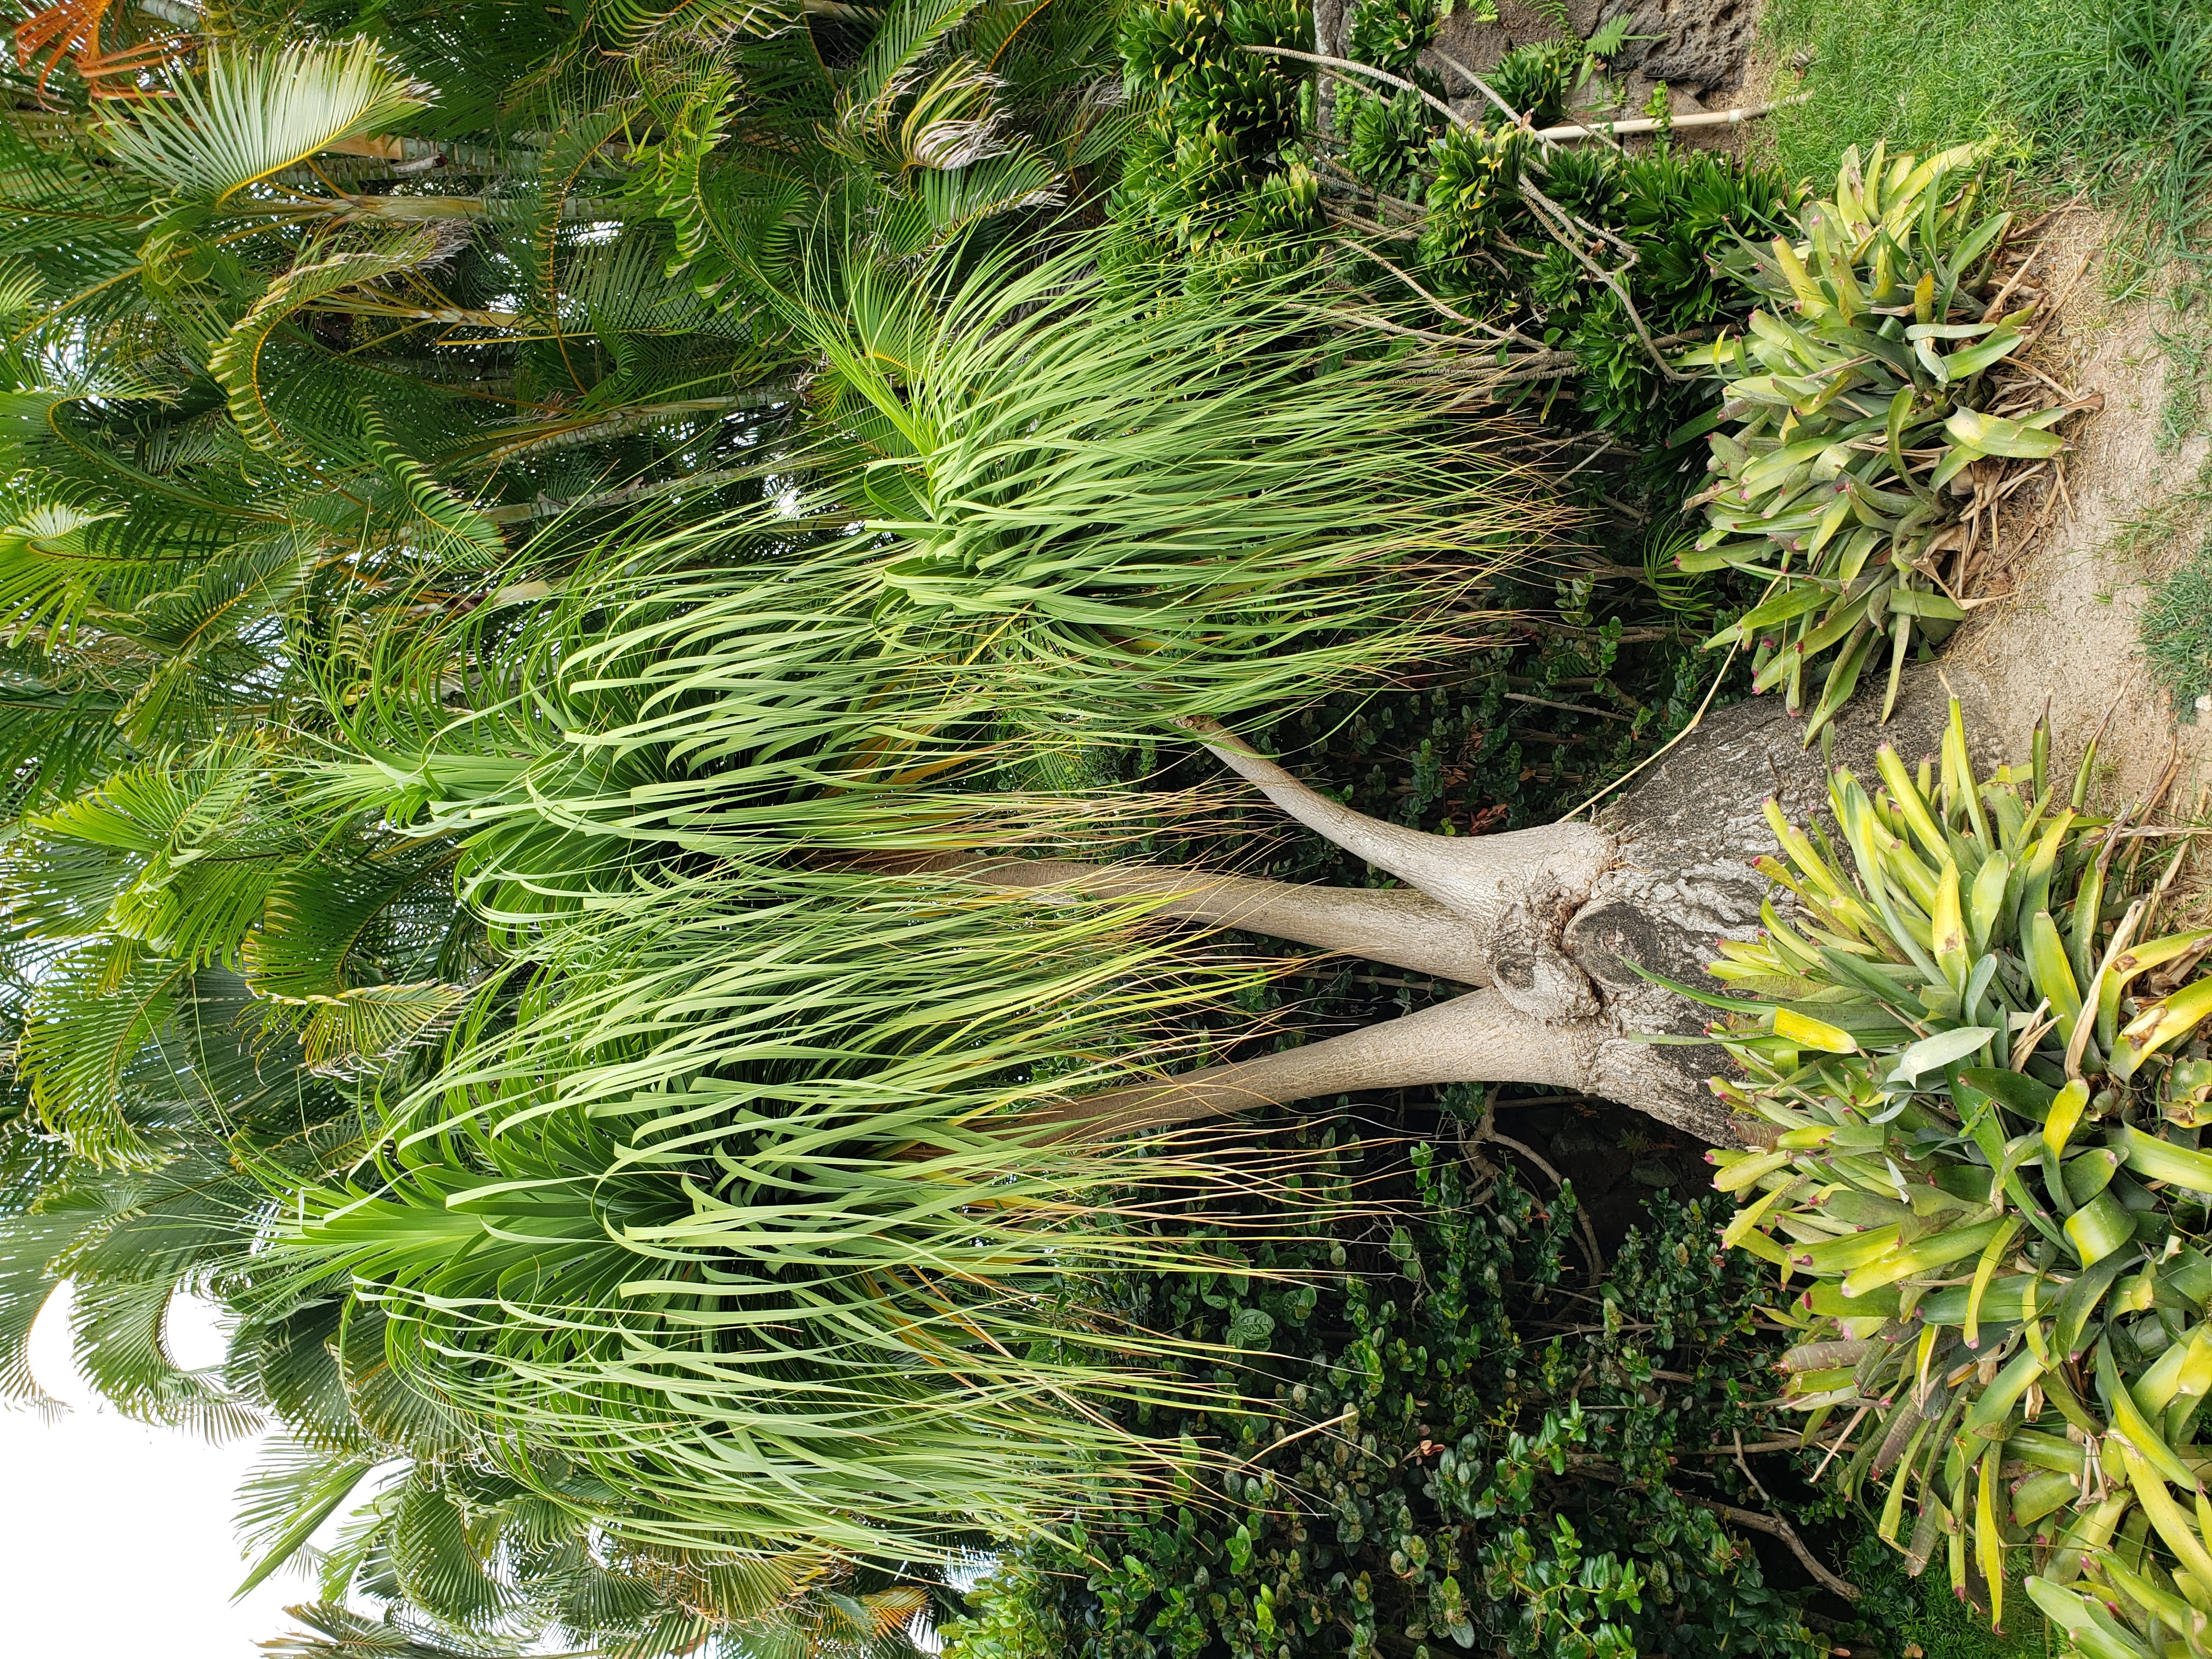 Ponytail palm with 3 tufts